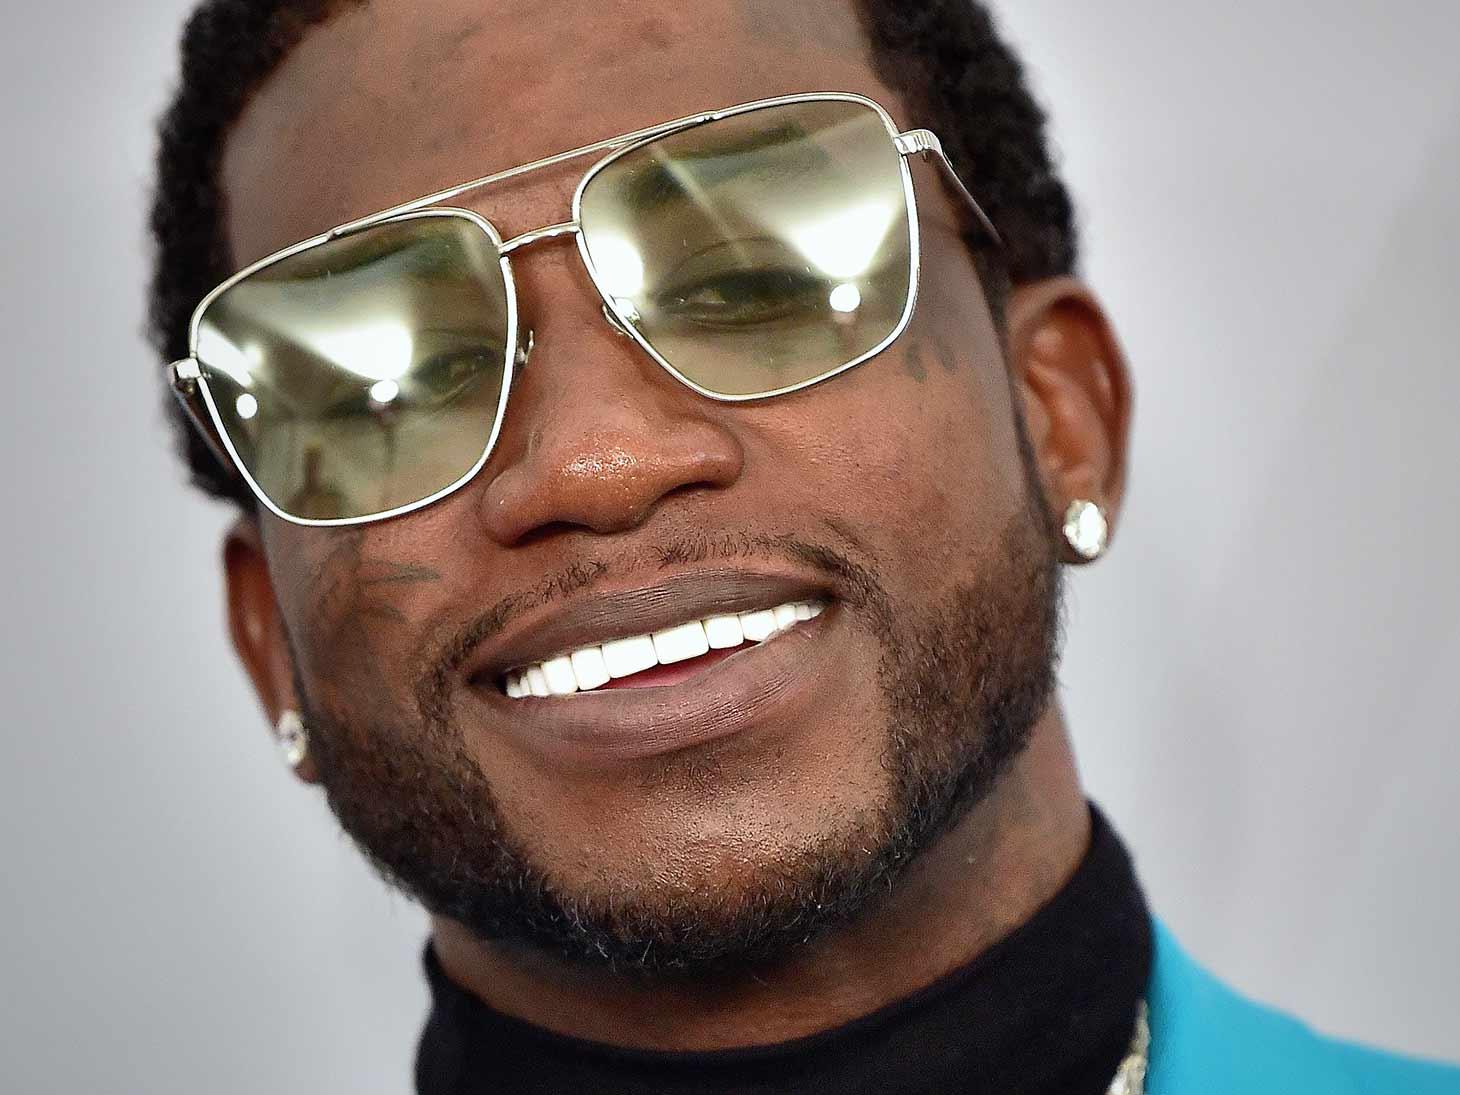 Gucci Mane Doesn’t Want to Pay Baby Mama More Child Support, Denies Lavish Lifestyle